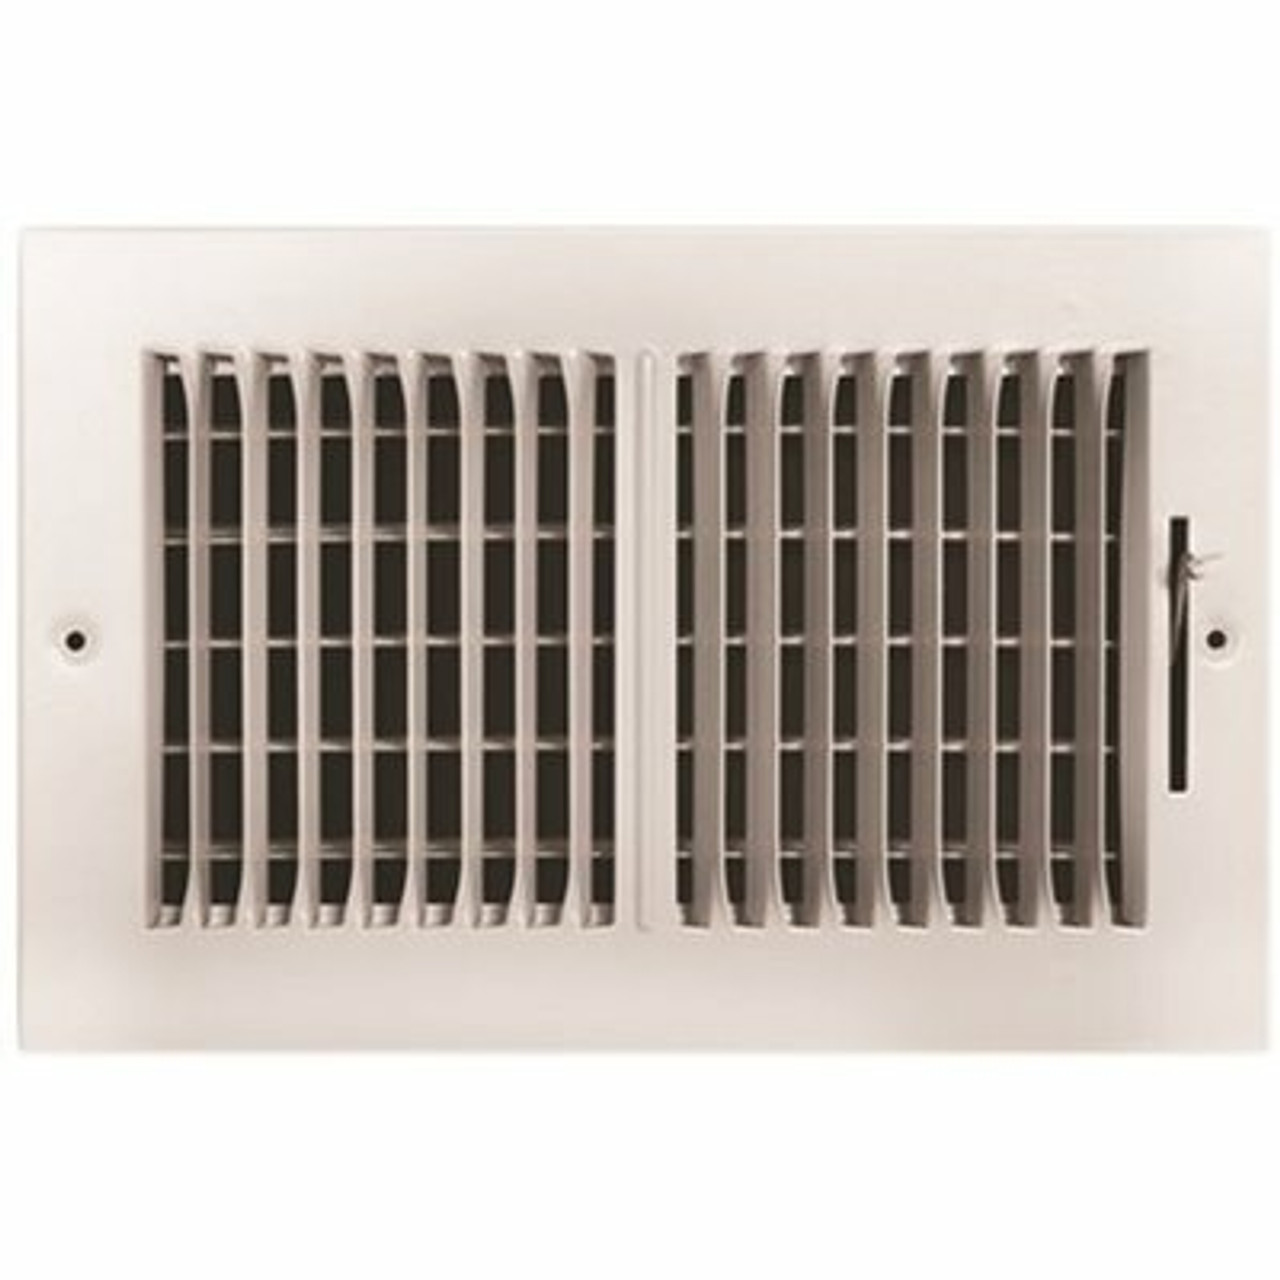 KIT ORDERS ONLY - NOT FOR INDIVIDUAL SALE - TruAire 10 in. x 6 in. 2-Way Steel Wall/Ceiling Register